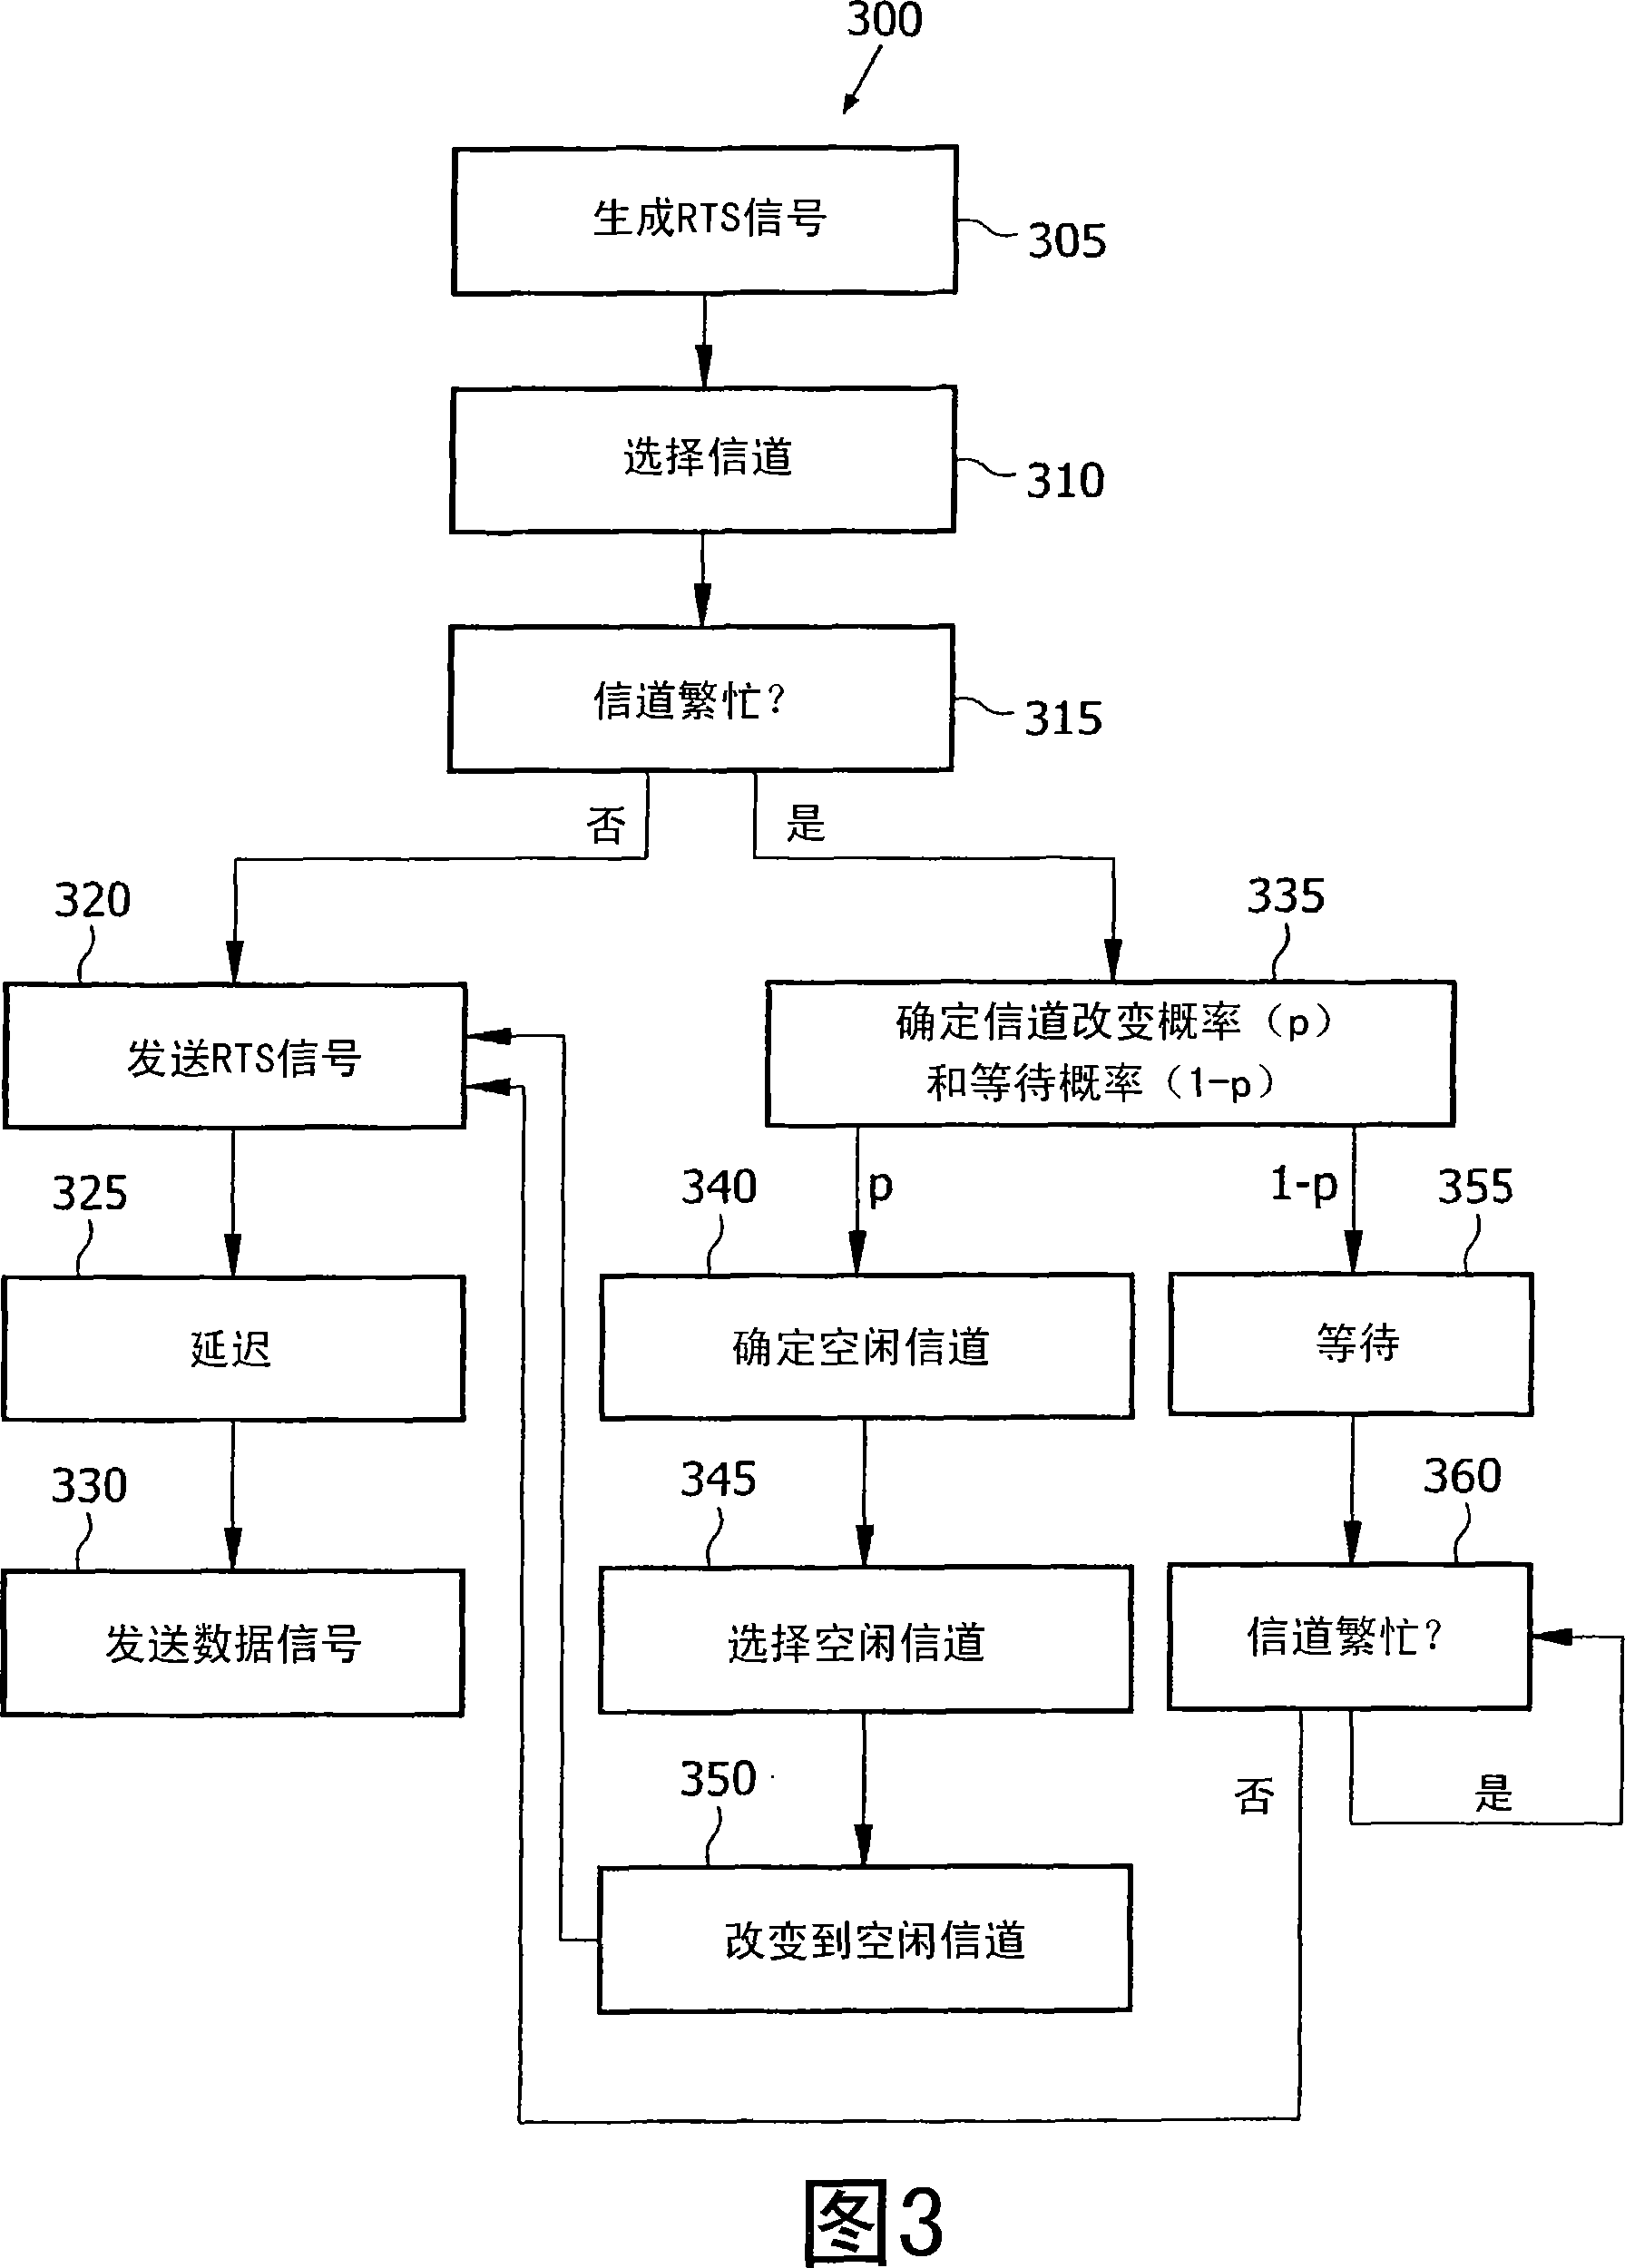 A method of operating a network node of a network, a network node, a network system, a computer-readable medium, and a program element